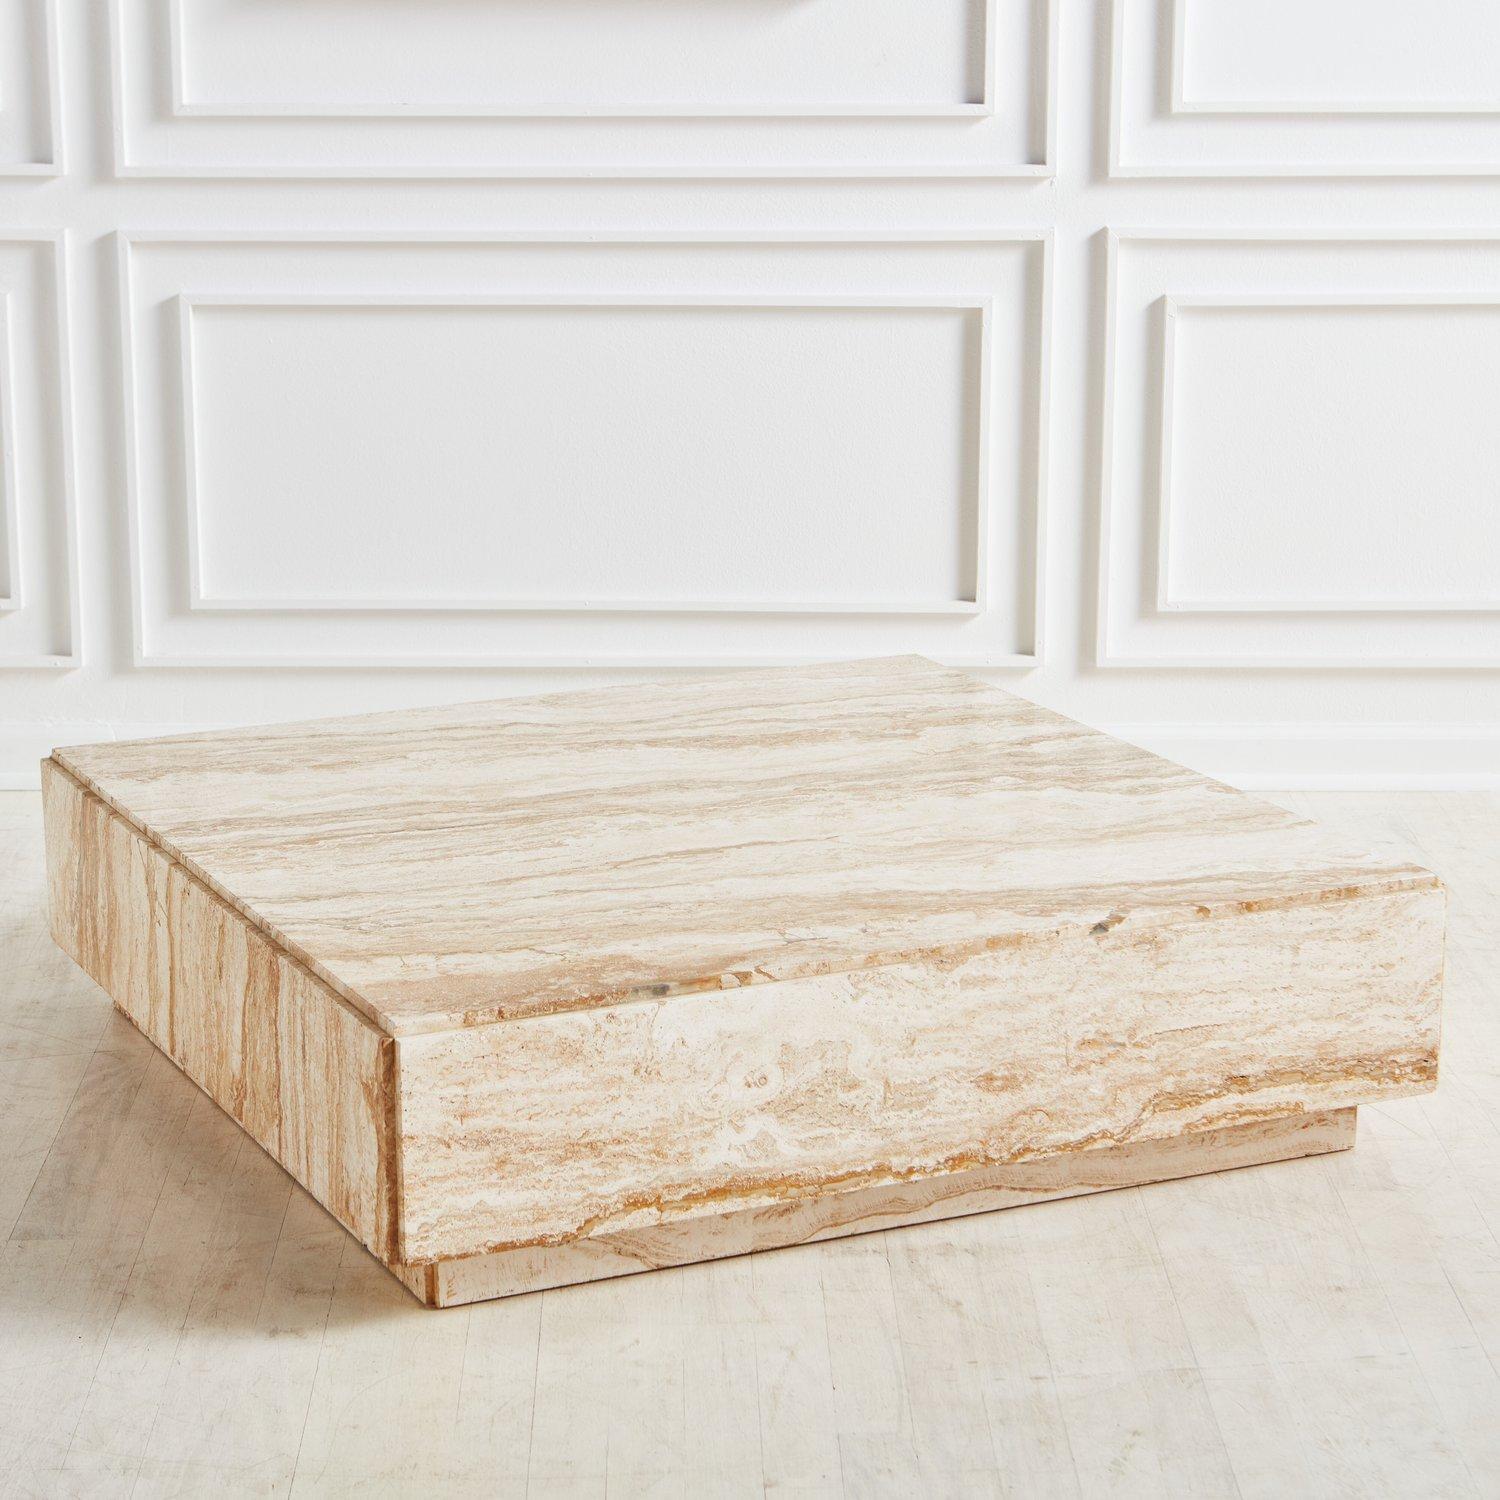 Mid-Century Modern Monolith Travertine Coffee Table Attributed to Milo Baughman for Directional